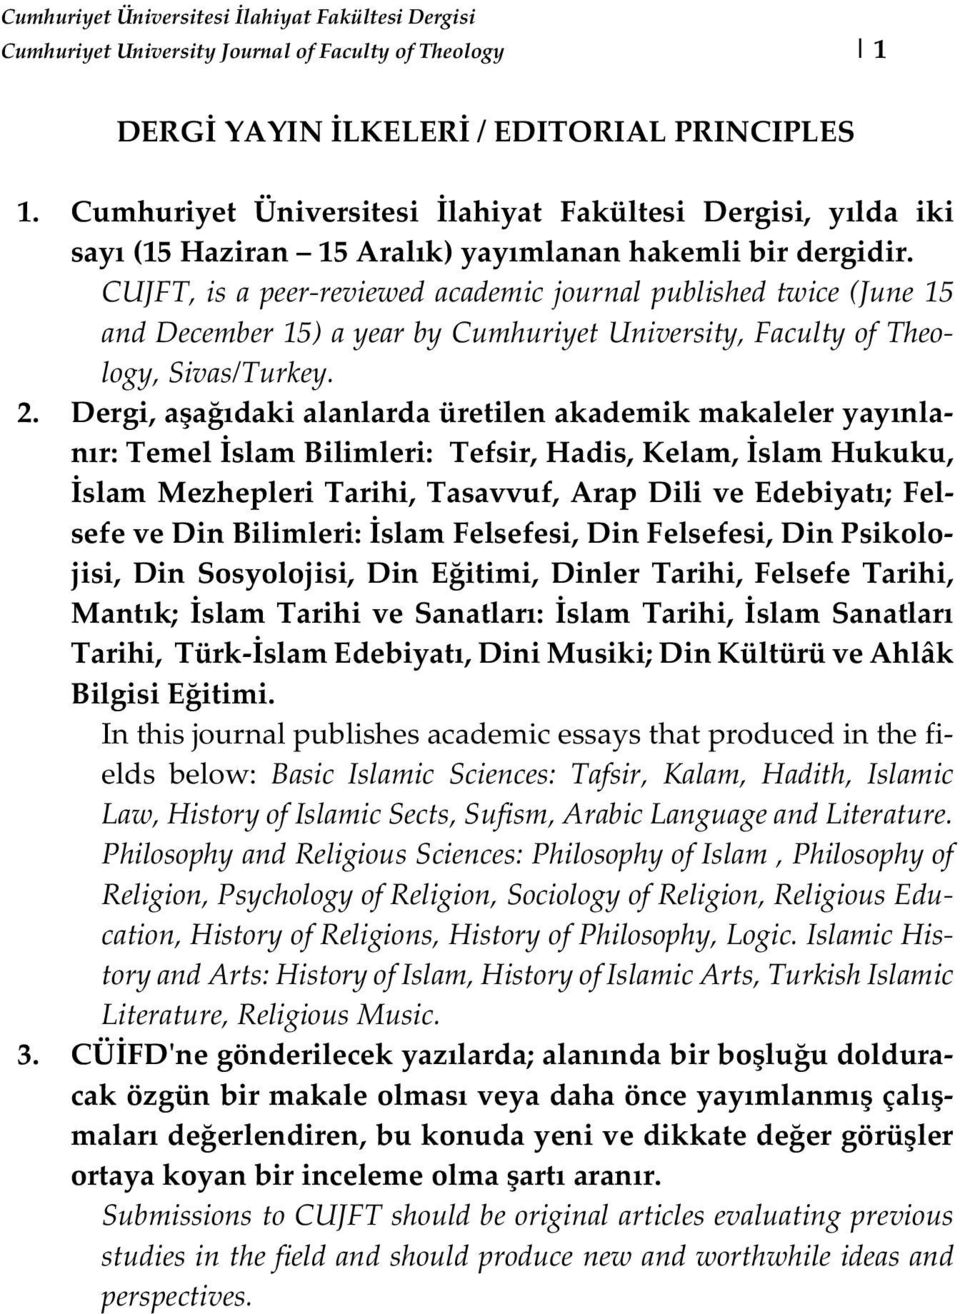 CUJFT, is a peer-reviewed academic journal published twice (June 15 and December 15) a year by Cumhuriyet University, Faculty of Theology, Sivas/Turkey. 2.